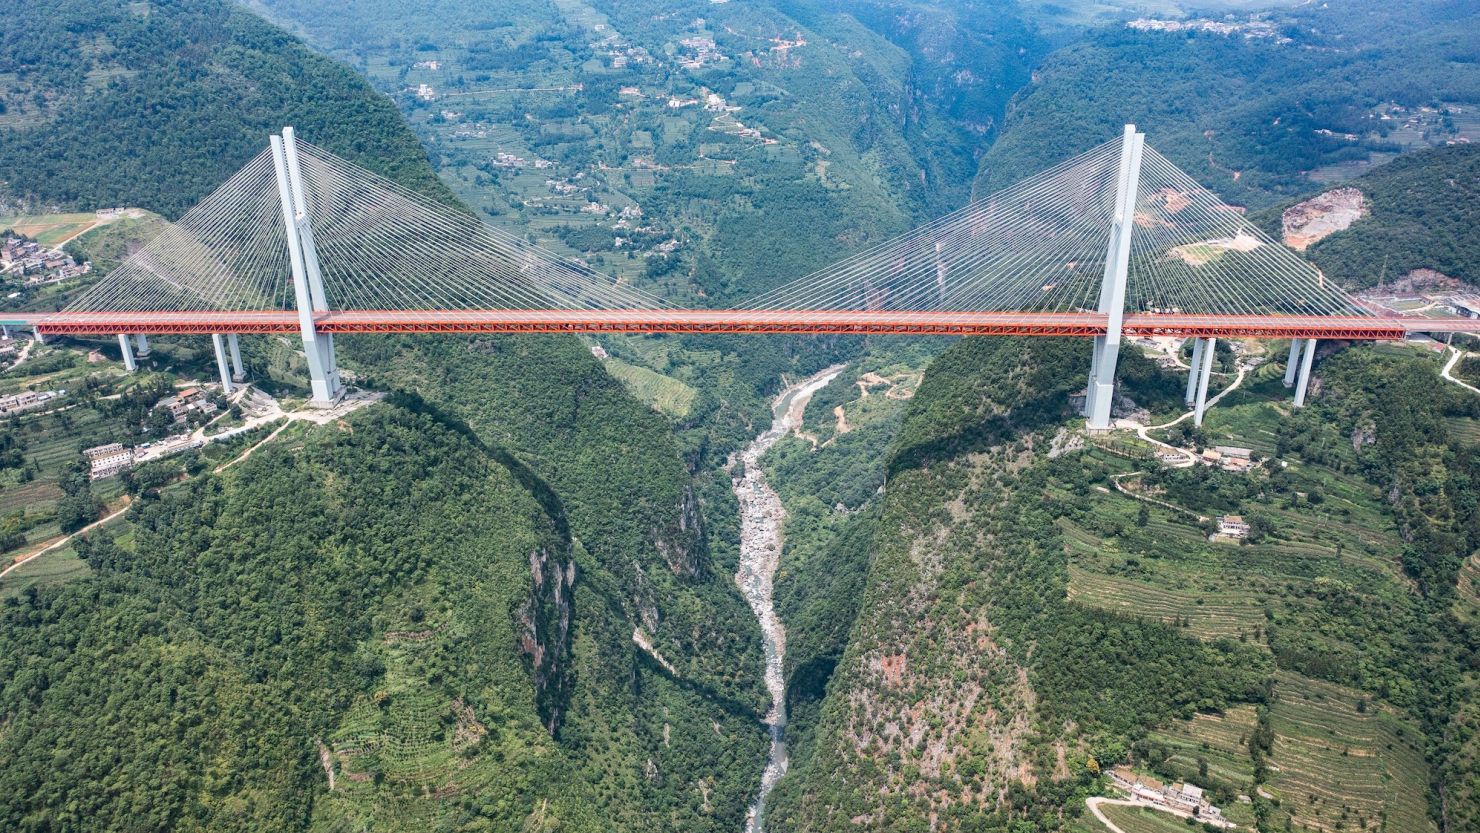 The Beipanjiang Bridge is located in China's Guizhou province, which has borrowed heavily to fund its infrastructure spending.